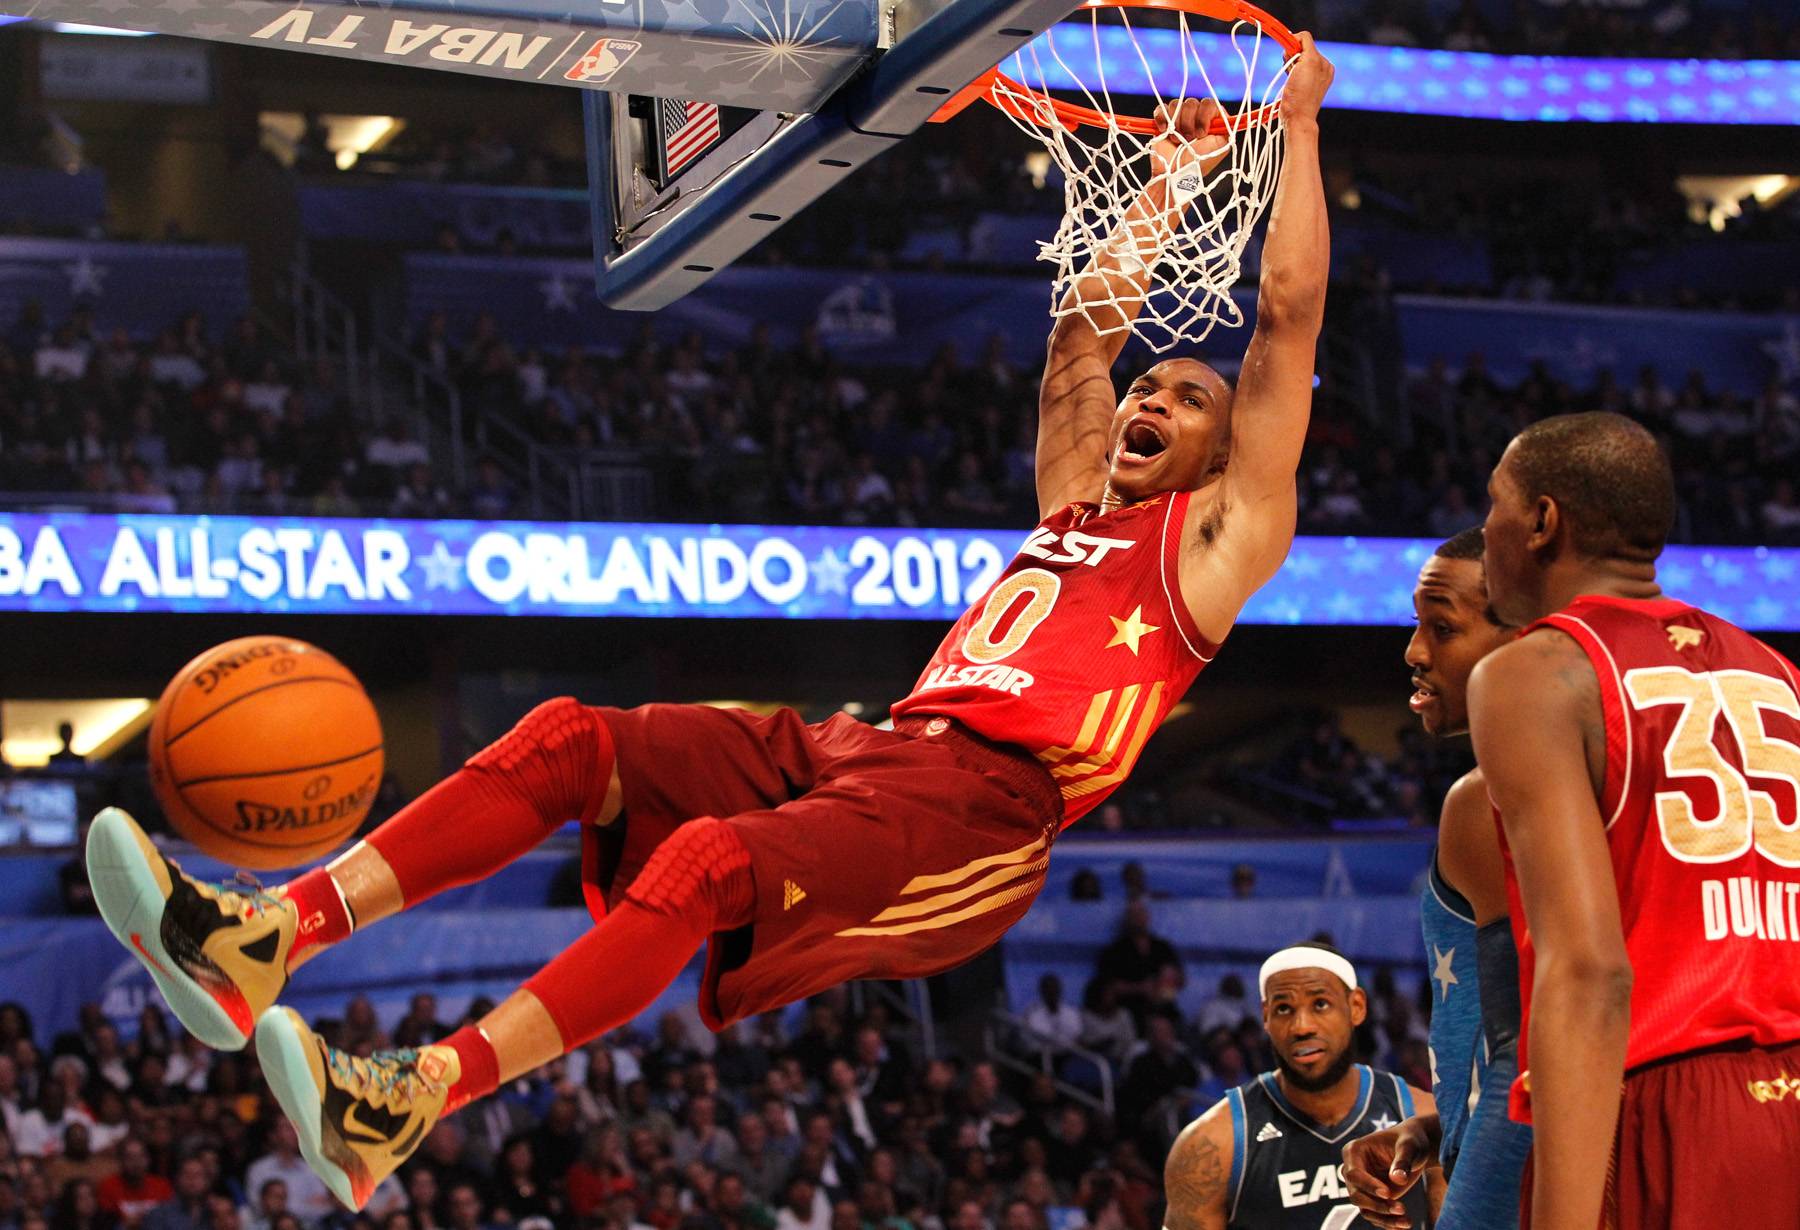 Mission Accomplished - Russell Westbrook (0) of the Oklahoma City Thunder dunks. (Photo:&nbsp; Ronald Martinez/Getty Images)